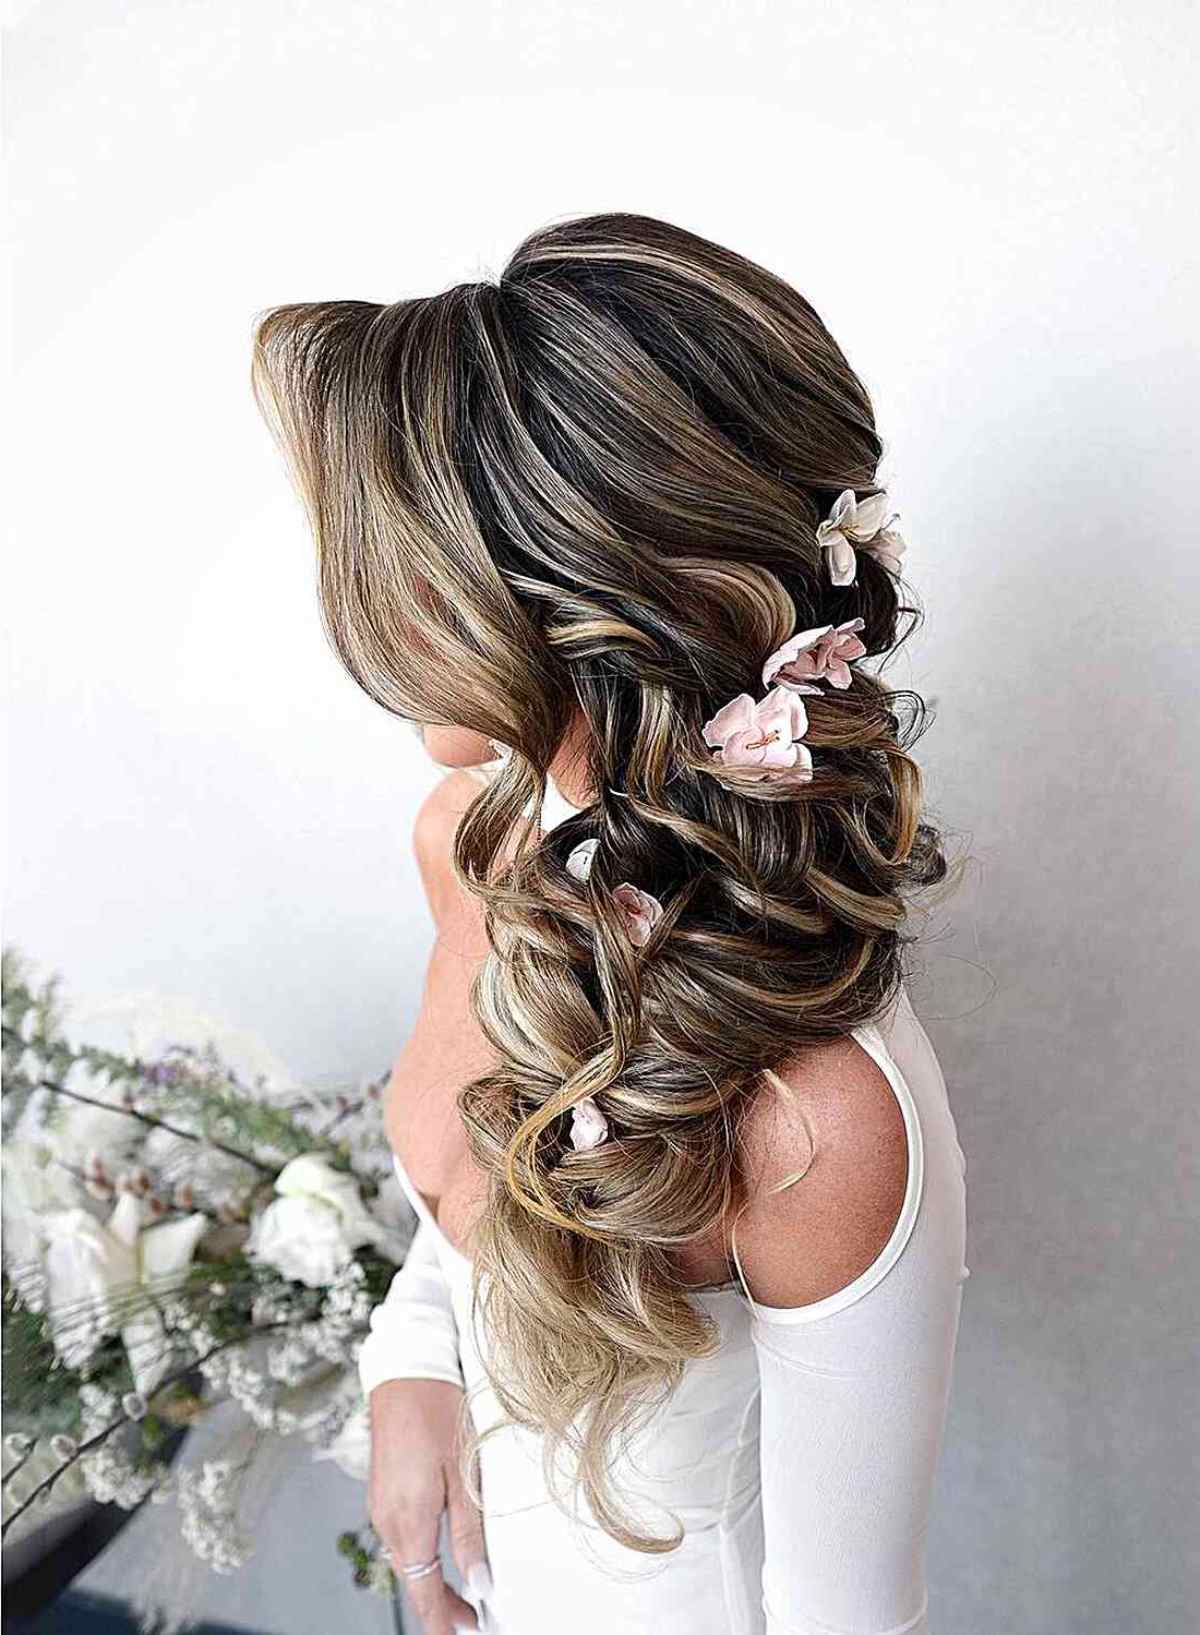 A half updo hairstyle with a twist angle